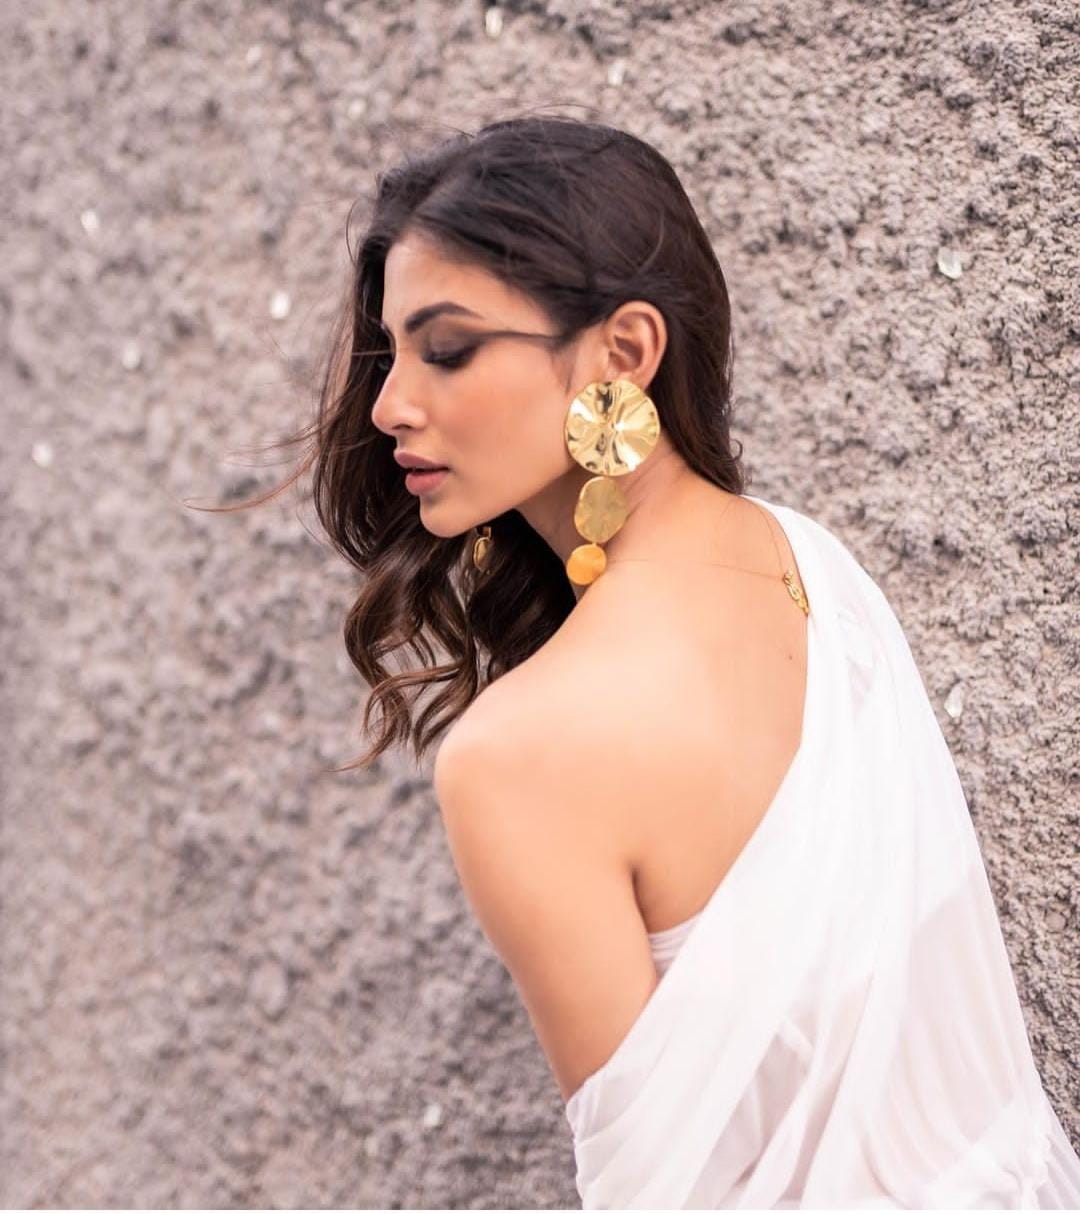 Mouni Roy shared her beautiful pictures on Instagram